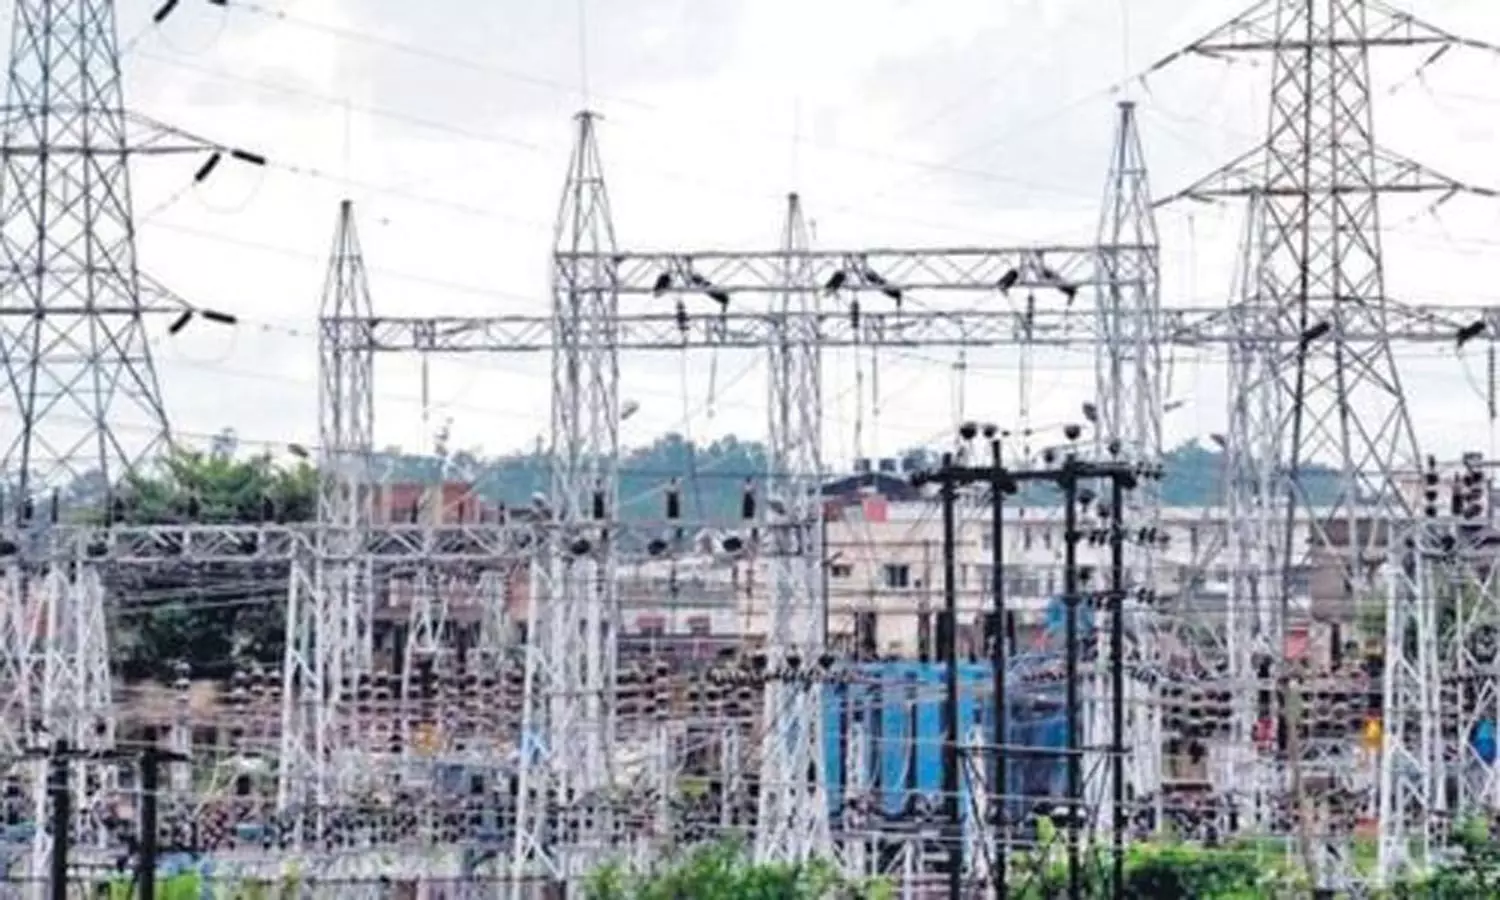 Brace for 20-pc fluctuations in electricity bill as Centre amends power tariff rules